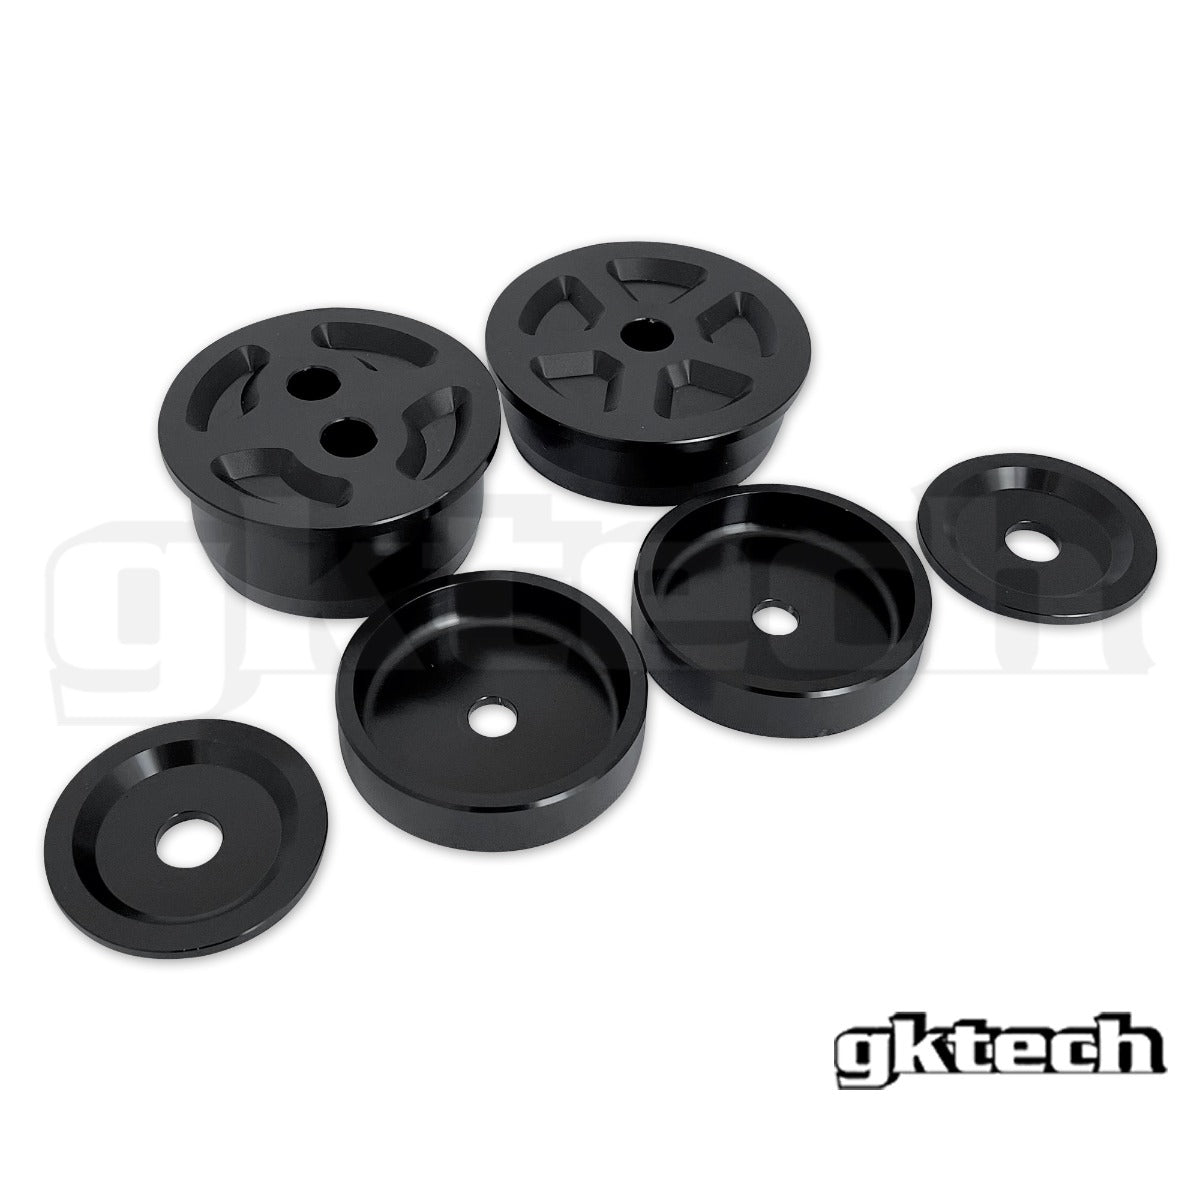 FR-S / GR86 / BR-Z chassis Solid diff bushings